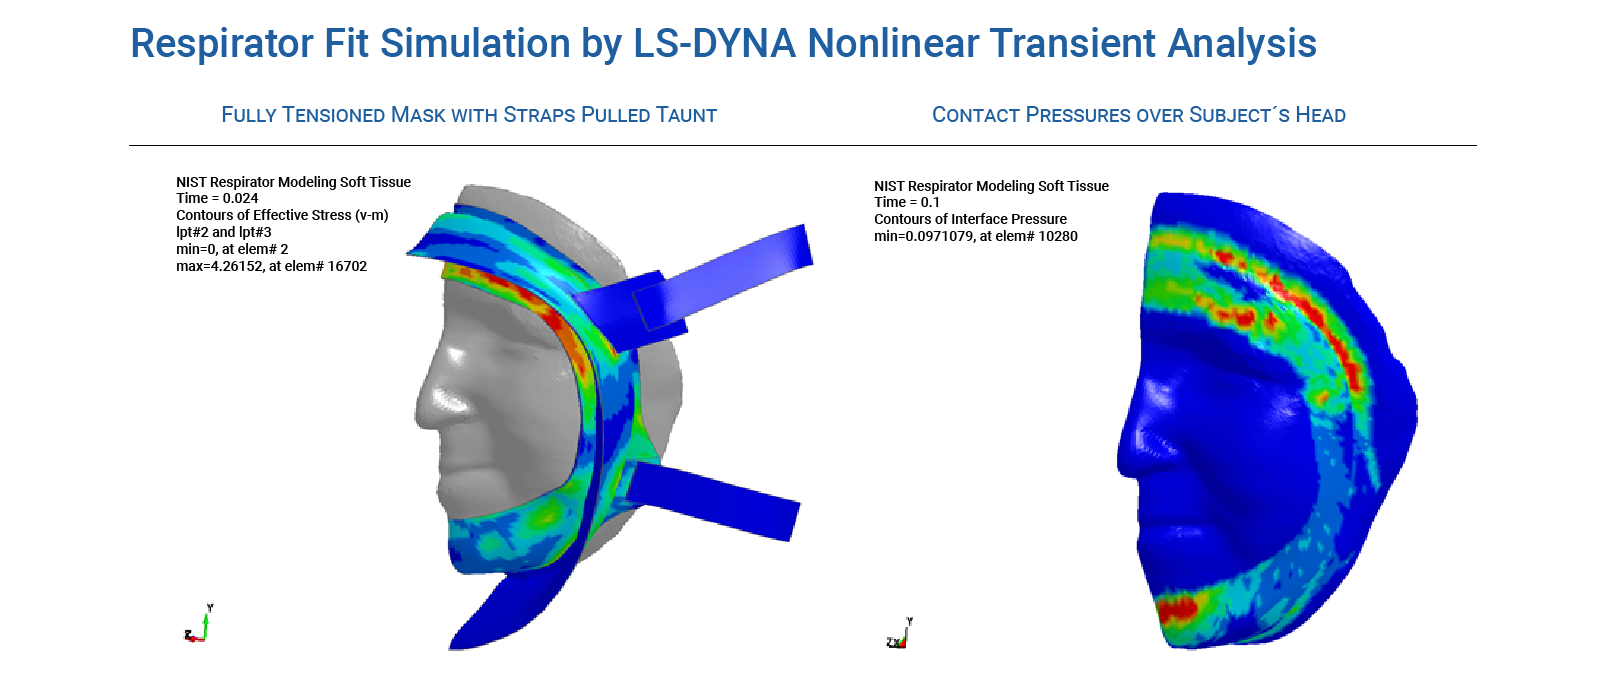 Dynamic nonlinear LS-DYNA simulation of Respirator Mask Fit Process - Predictive Engineering LS-DYNA Consulting Services